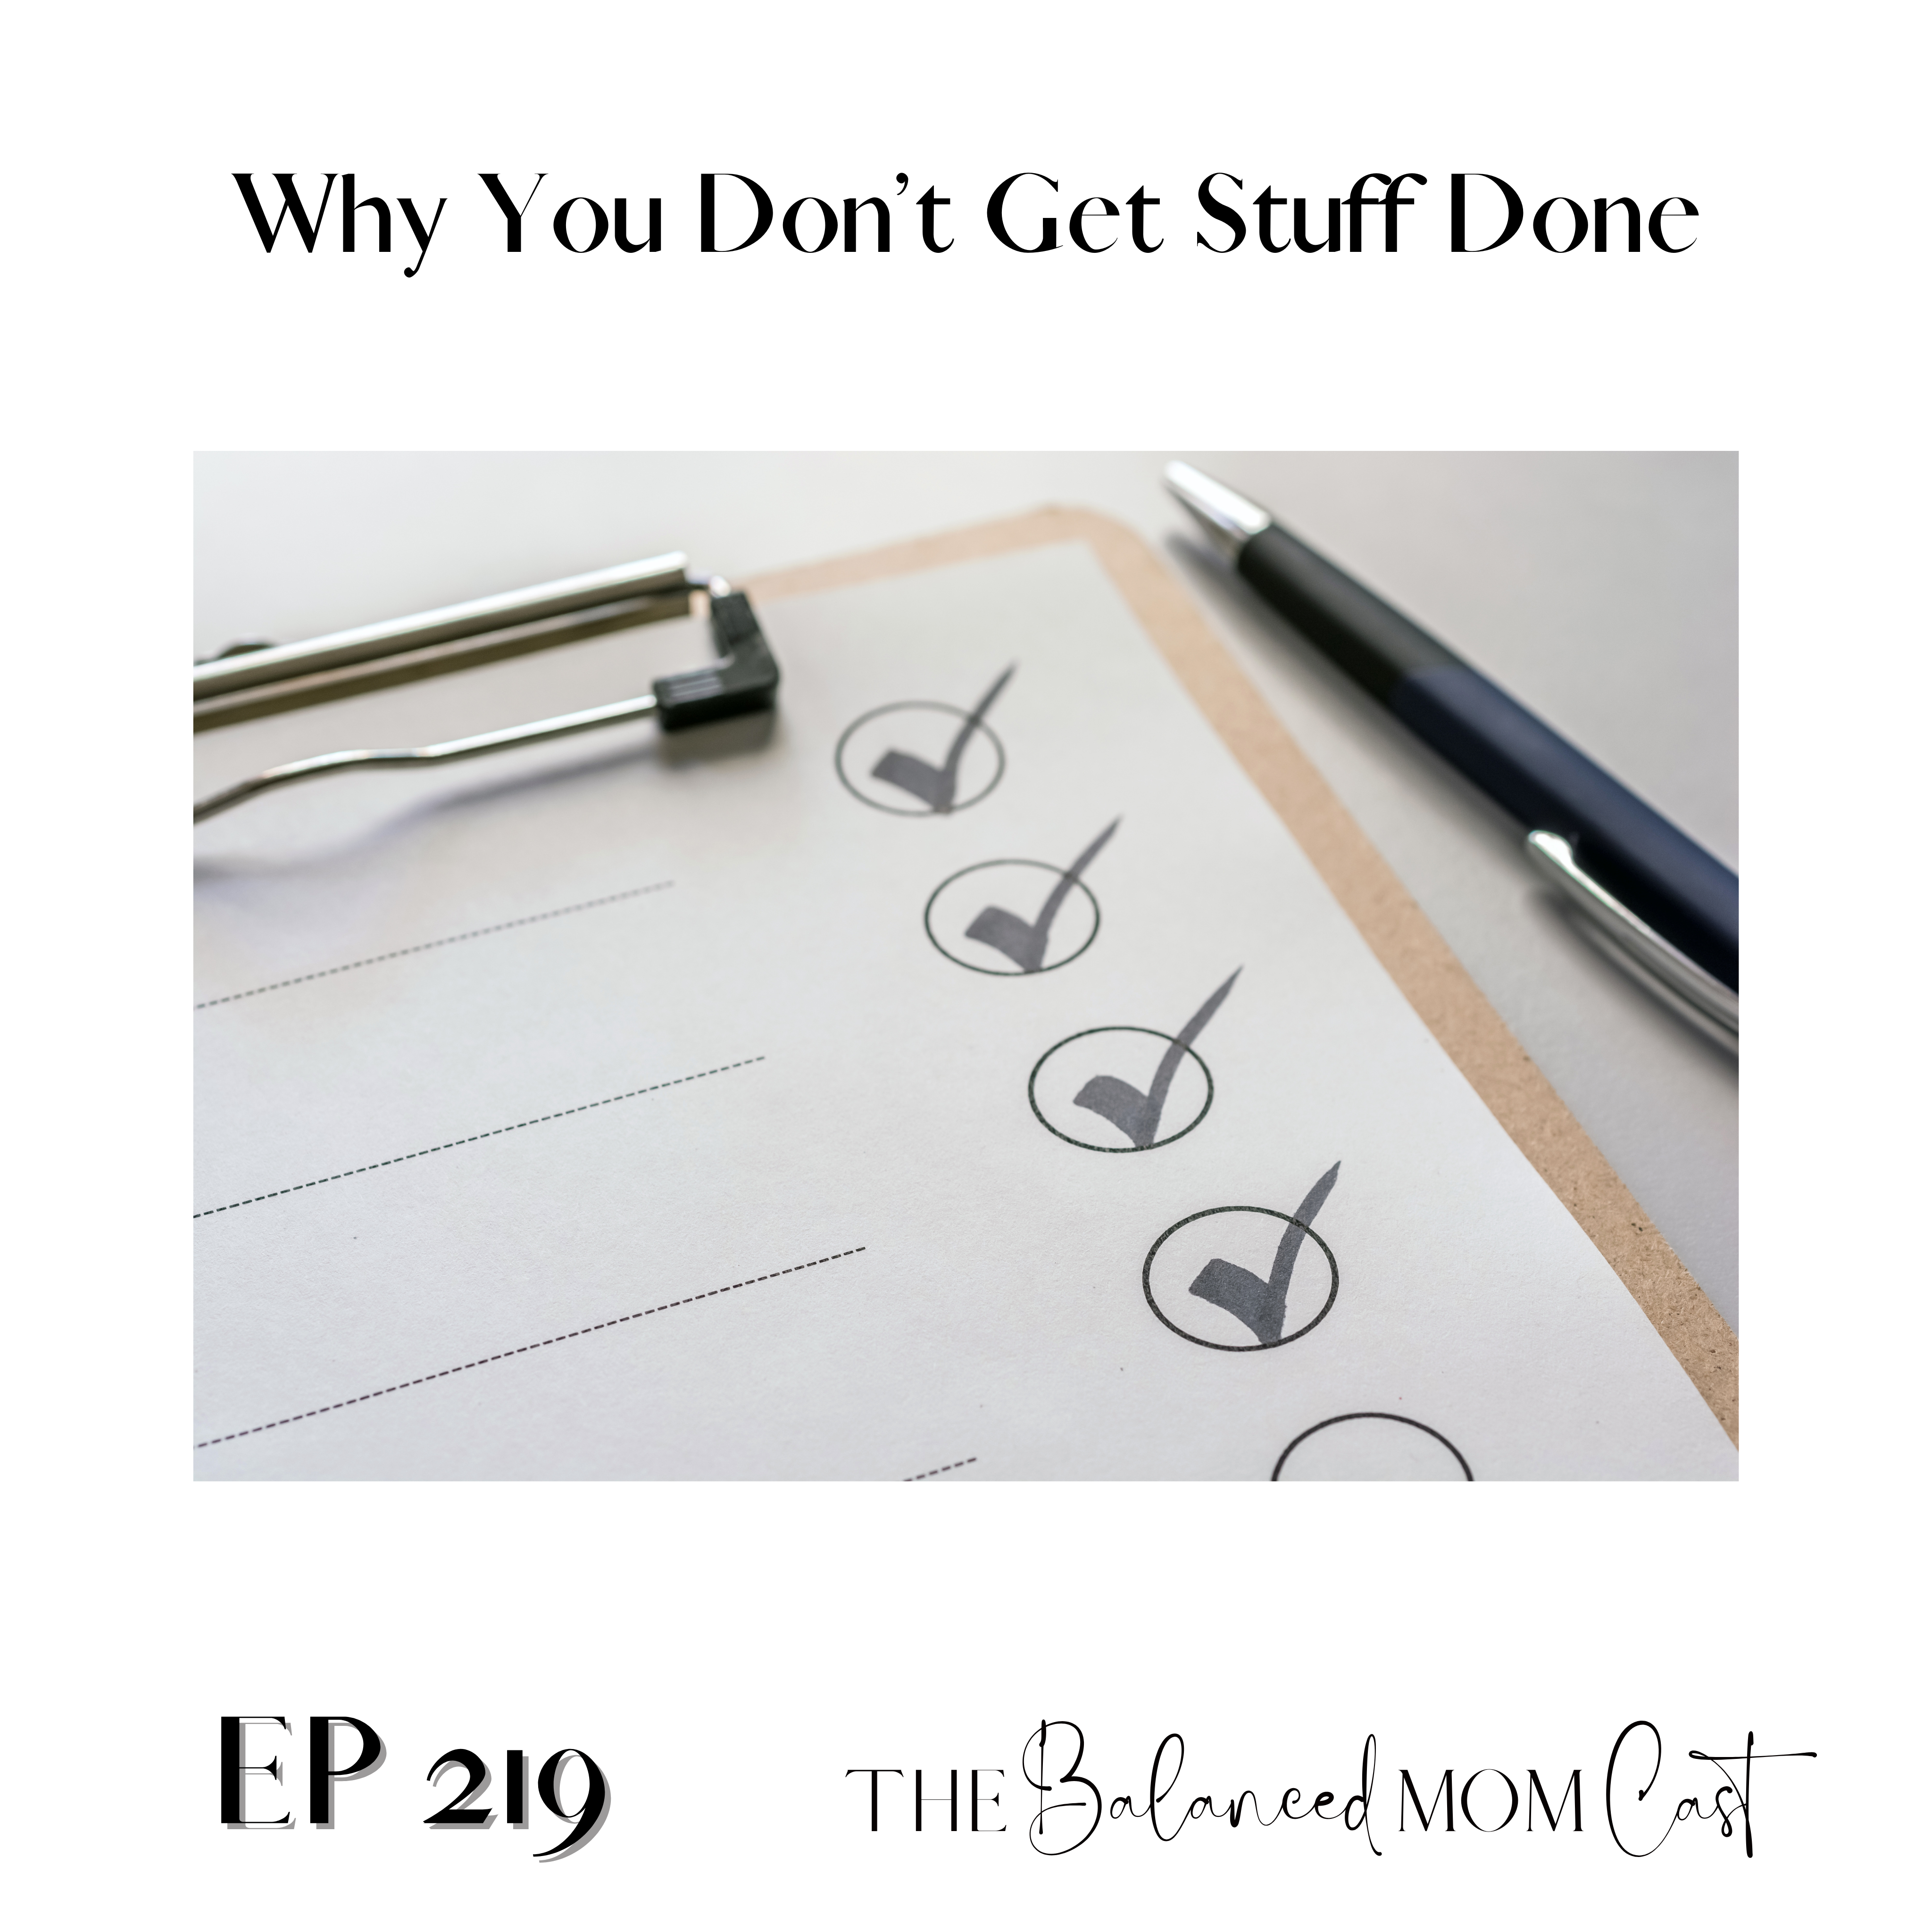 Ep 219: Why You Don’t Get Stuff Done